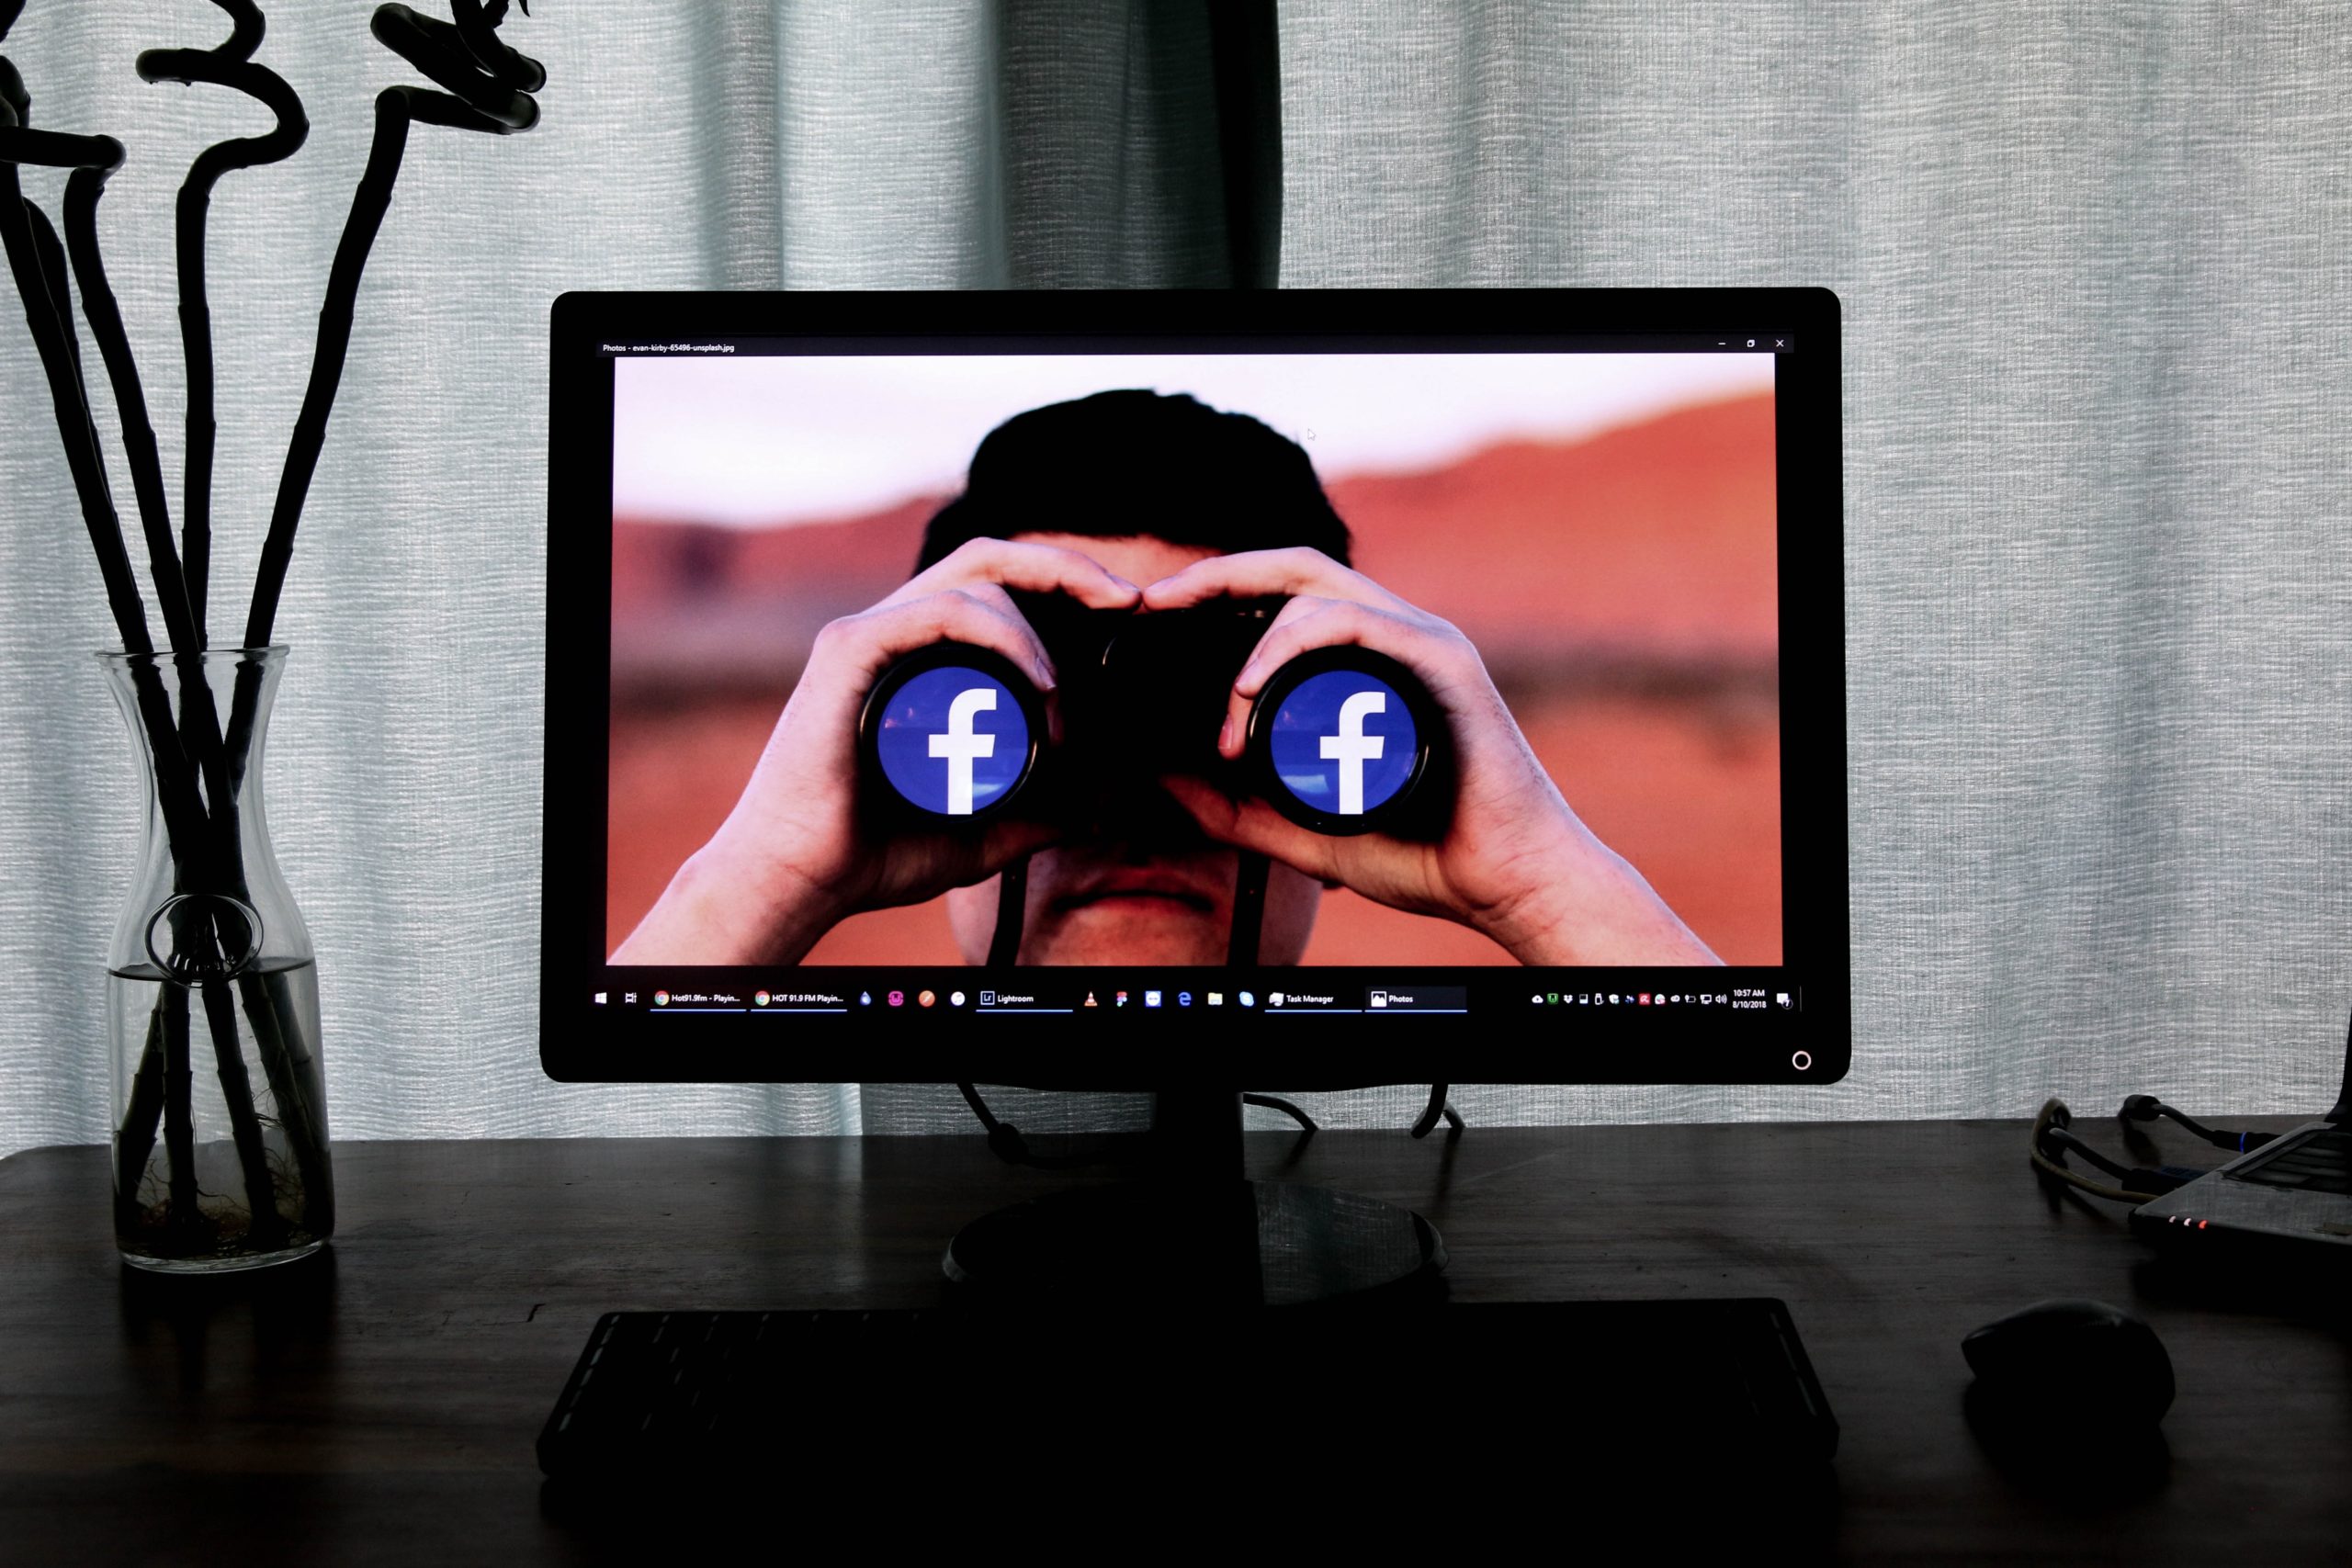 a computer screen showing a man holding binoculars with the facebook logo